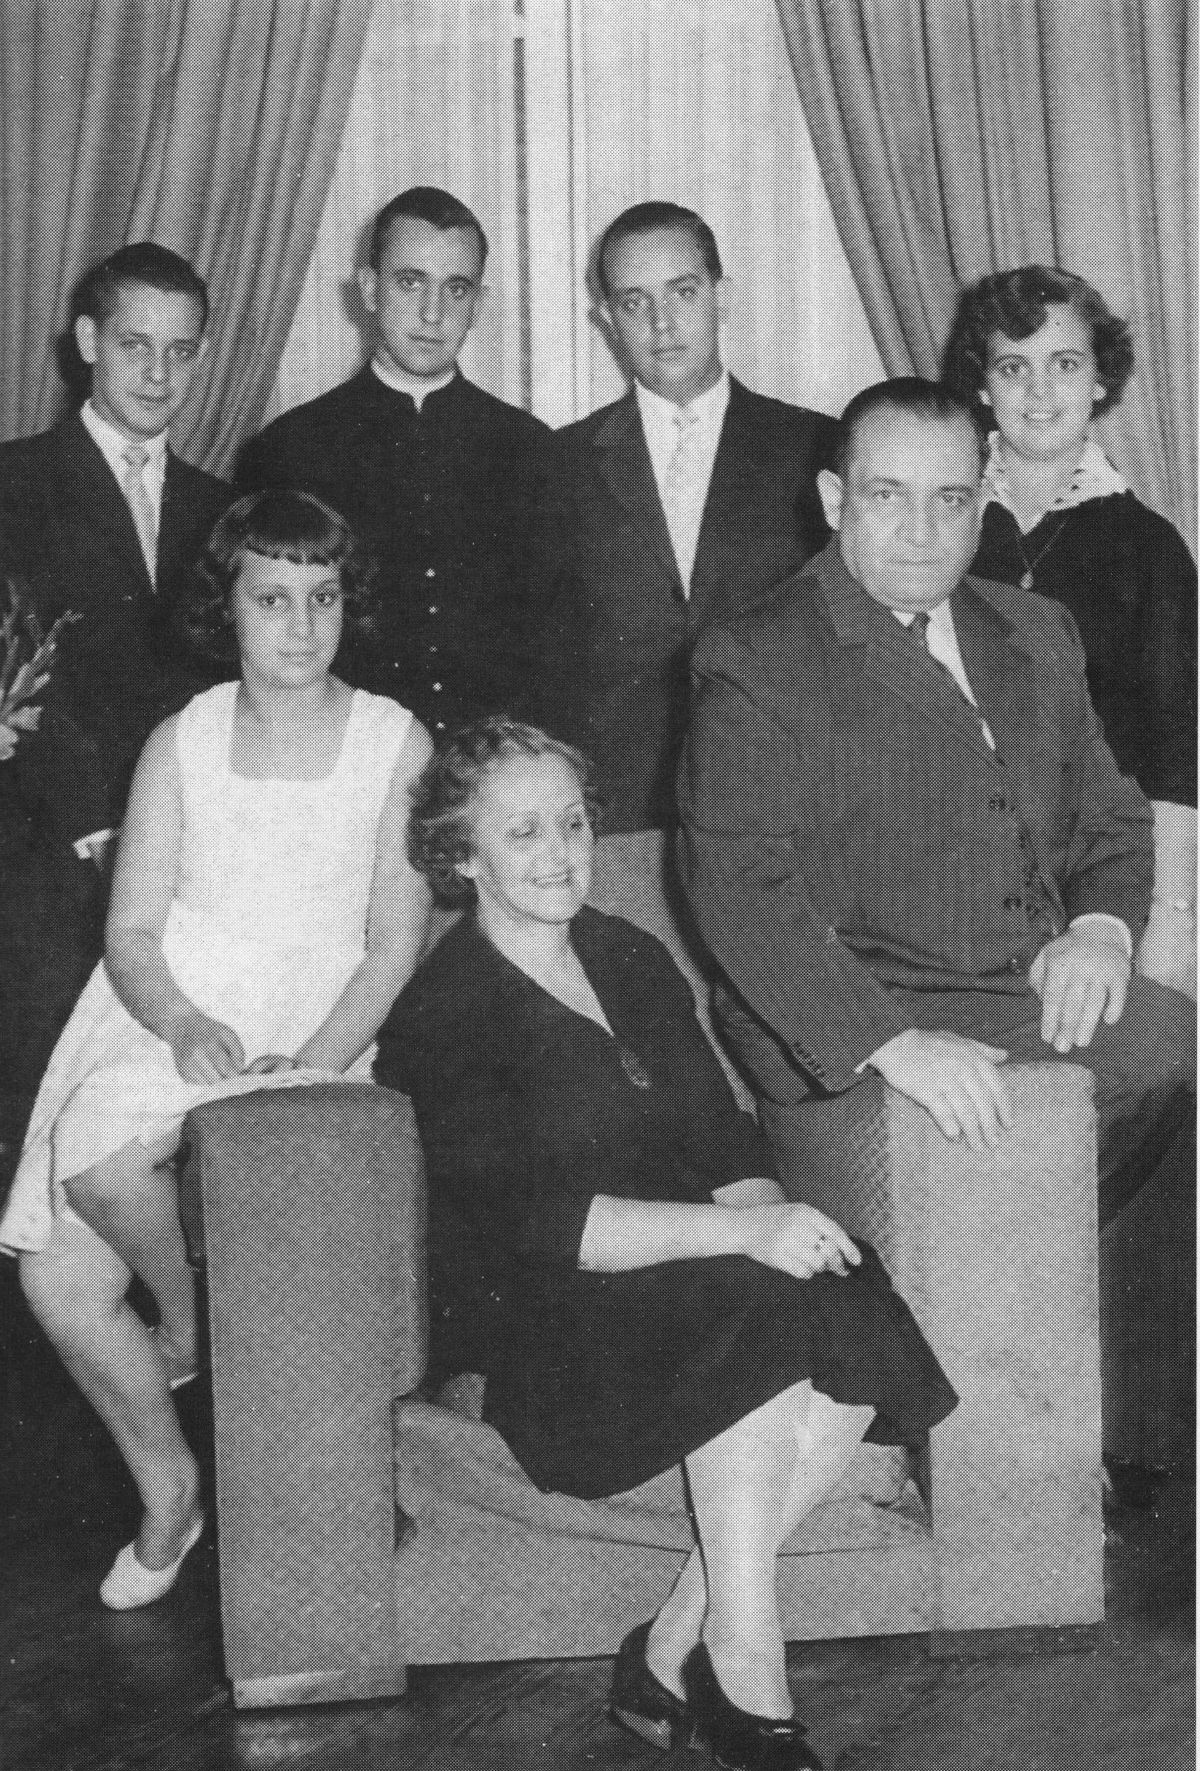 In this undated picture released by journalist Sergio Rubin, Cardinal Jorge Mario Bergoglio, Archbishop of Buenos Aires, second from left in back row, poses for a picture with his family in an unknown location. Bergoglio, who took the name of Pope Francis, was elected on Wednesday, March 13, 2013, the 266th pontiff of the Roman Catholic Church. Top row from left to right, his brother Alberto Horacio, Bergoglio, his brother Oscar Adrian and his sister Marta Regina. Bottom row from left to right, his sister Maria Elena, his mother Regina Maria Sivori and his father Mario Jose Bergoglio. (Sergio Rubin)